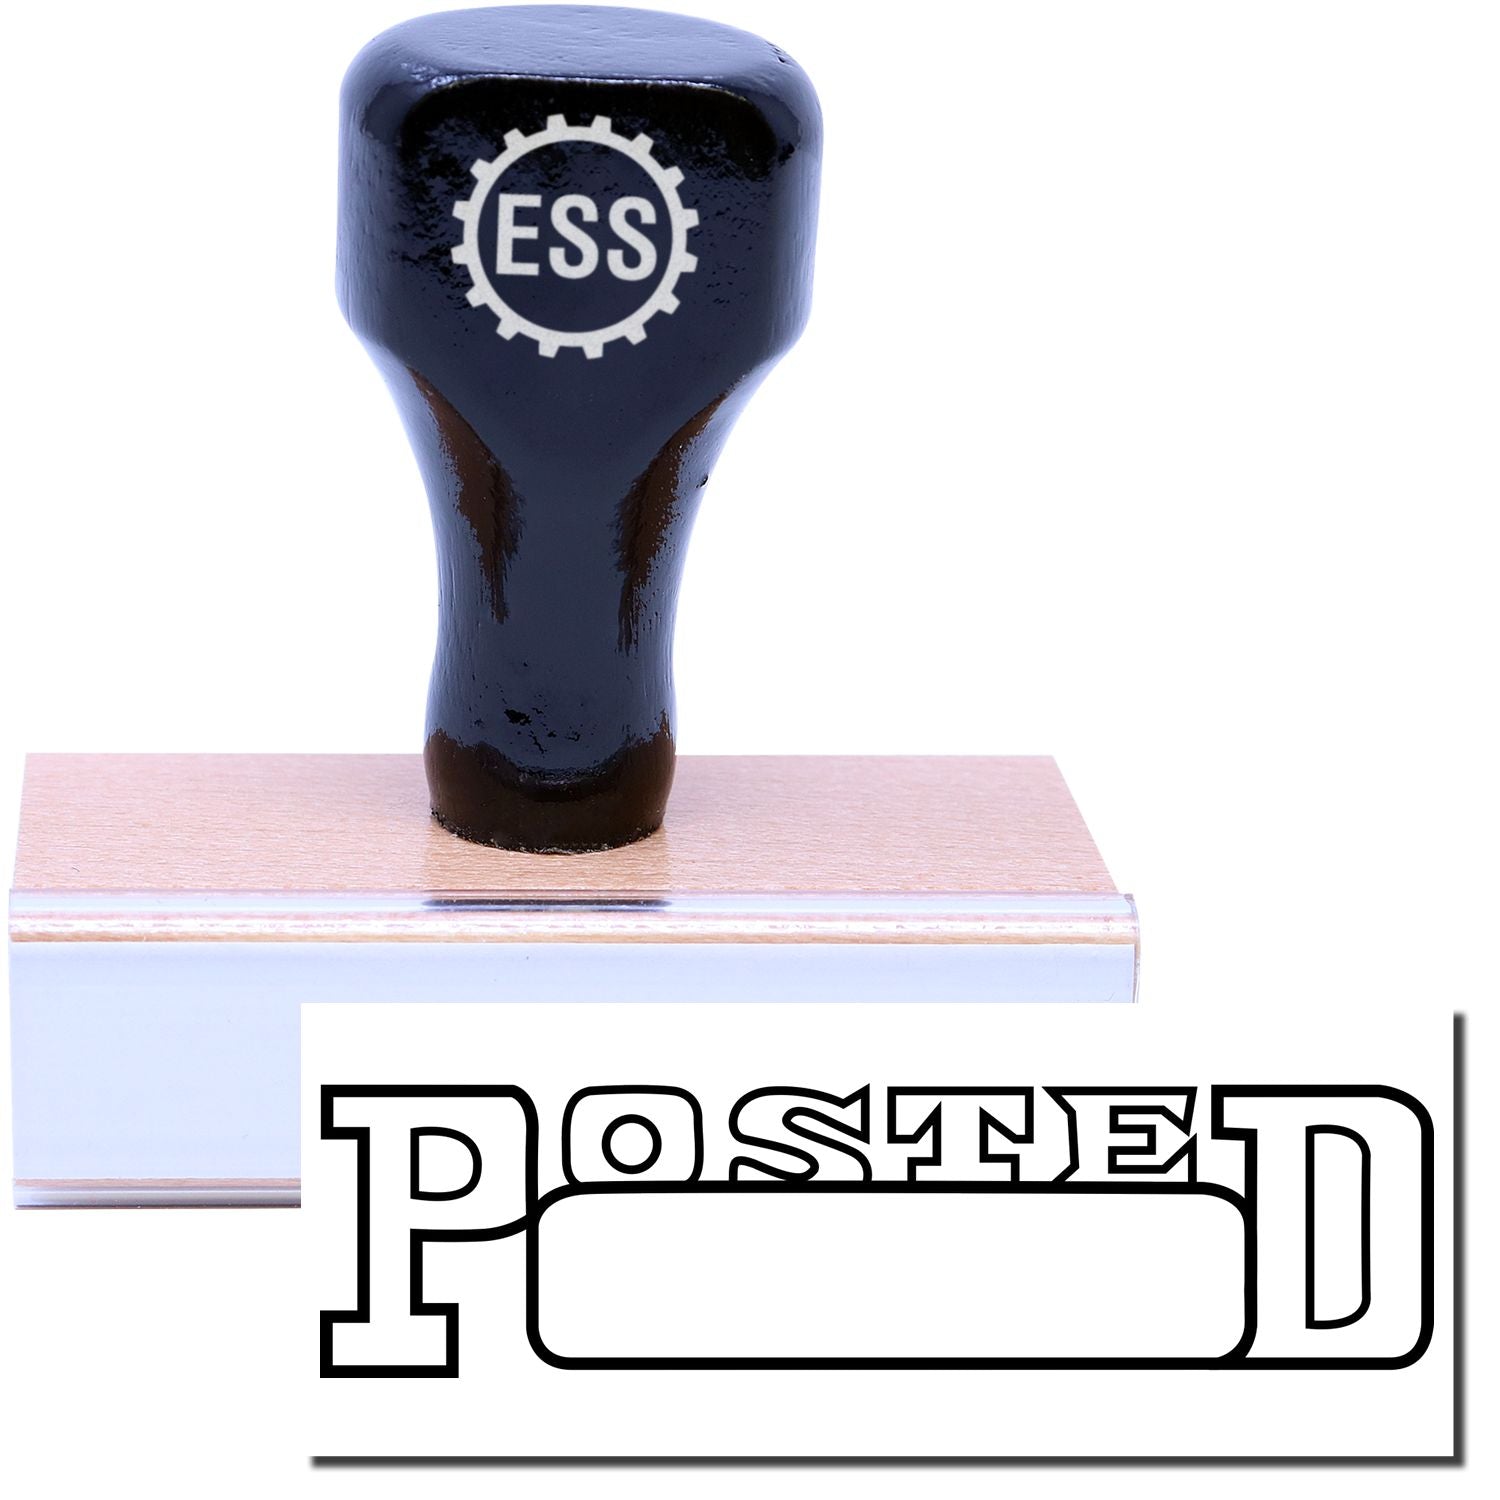 A stock office rubber stamp with a stamped image showing how the text "POSTED" in an outline font with a date box is displayed after stamping.